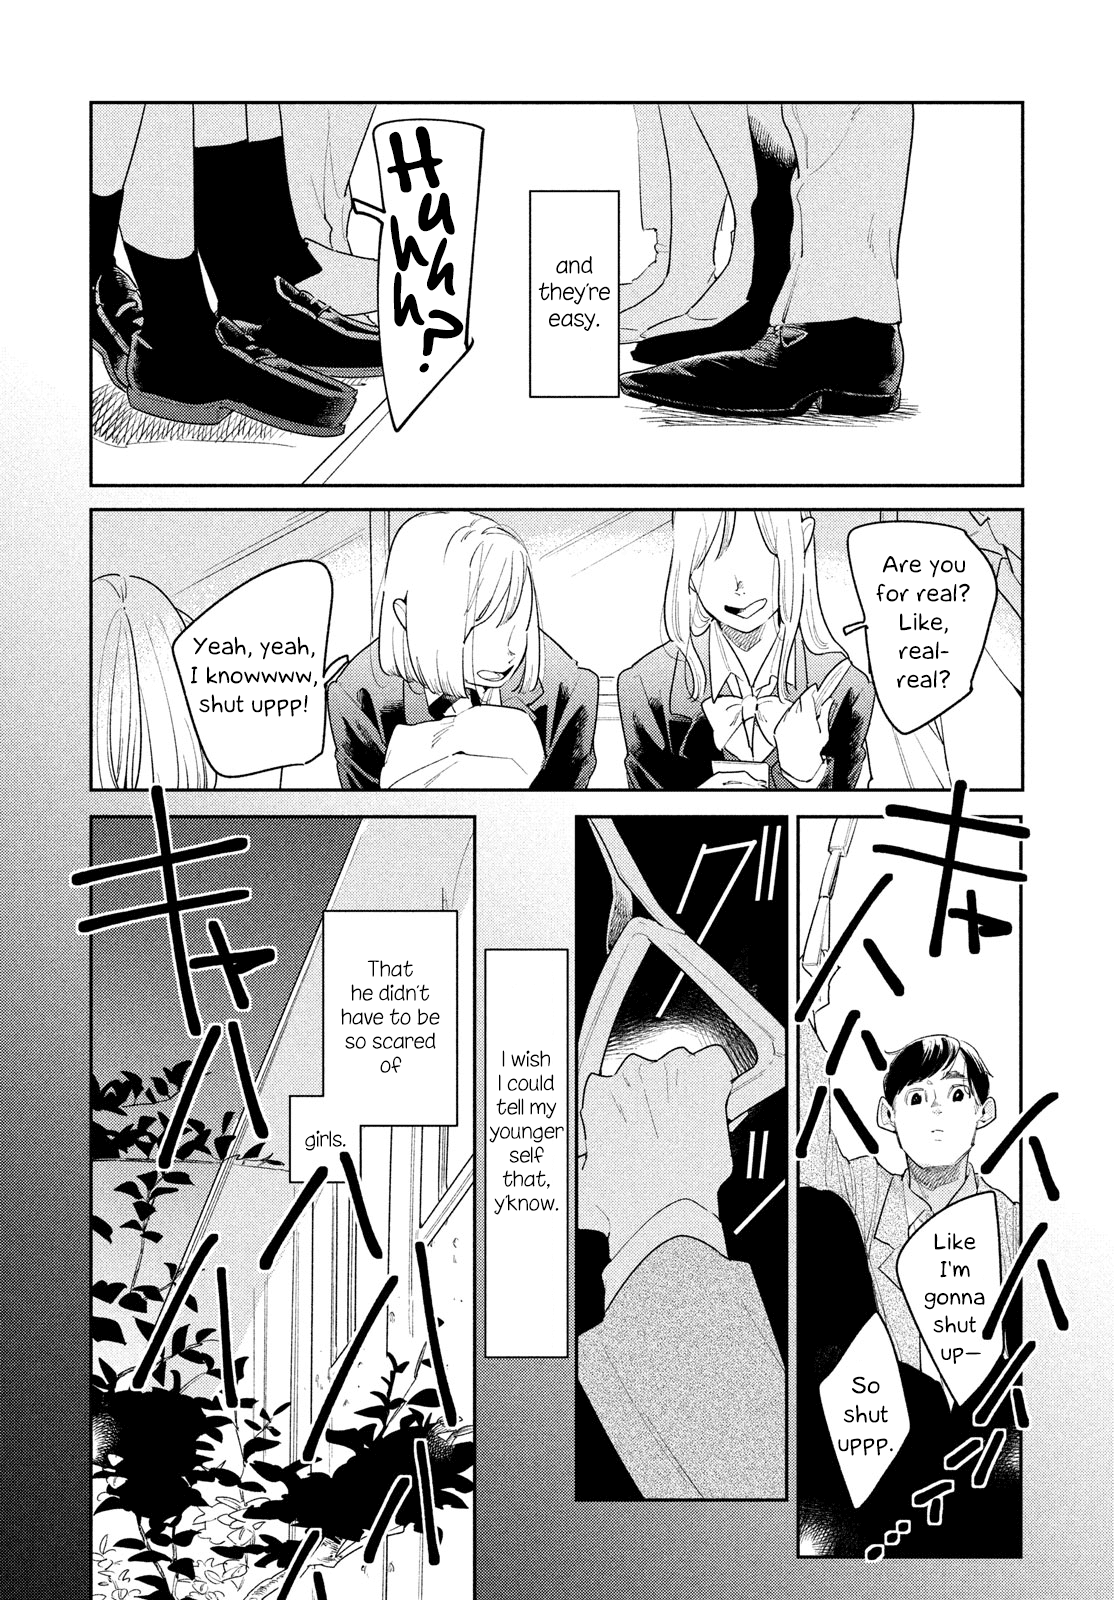 Run Away With me, Girl chapter 6 - page 5